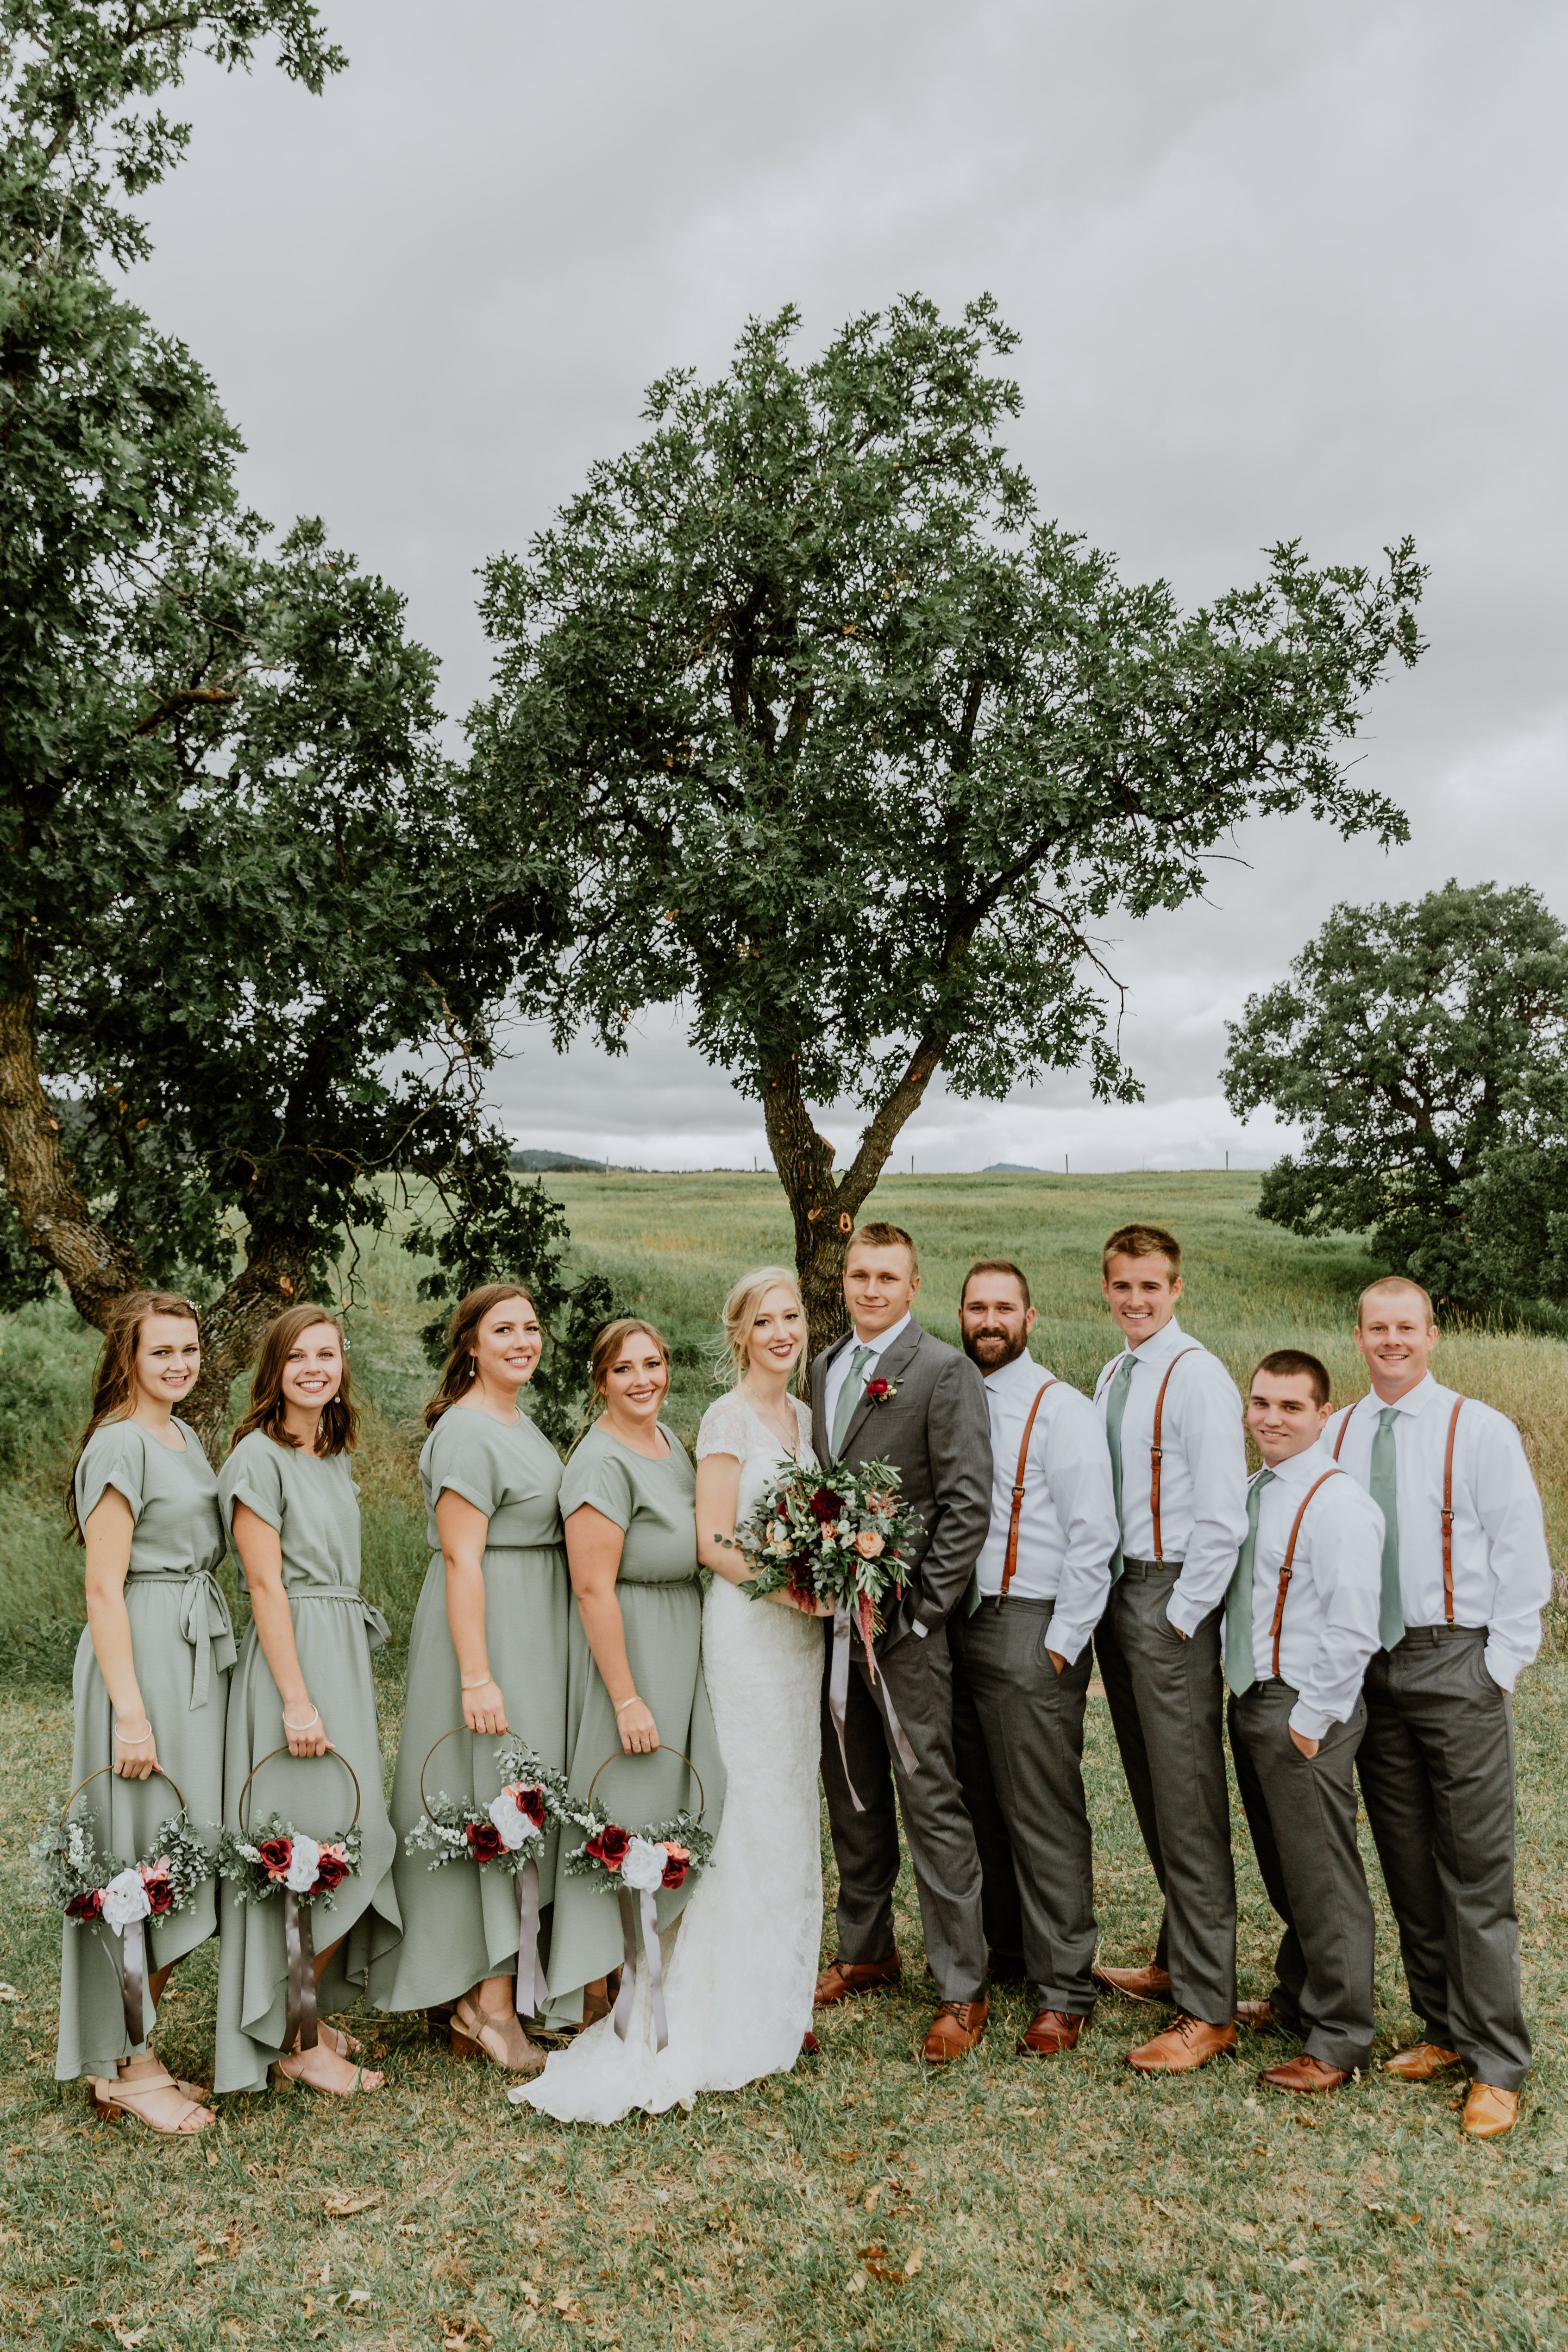 Bridal party wearing sage green dresses and suspenders at an outdoor summer wedding -   17 sage green wedding party ideas